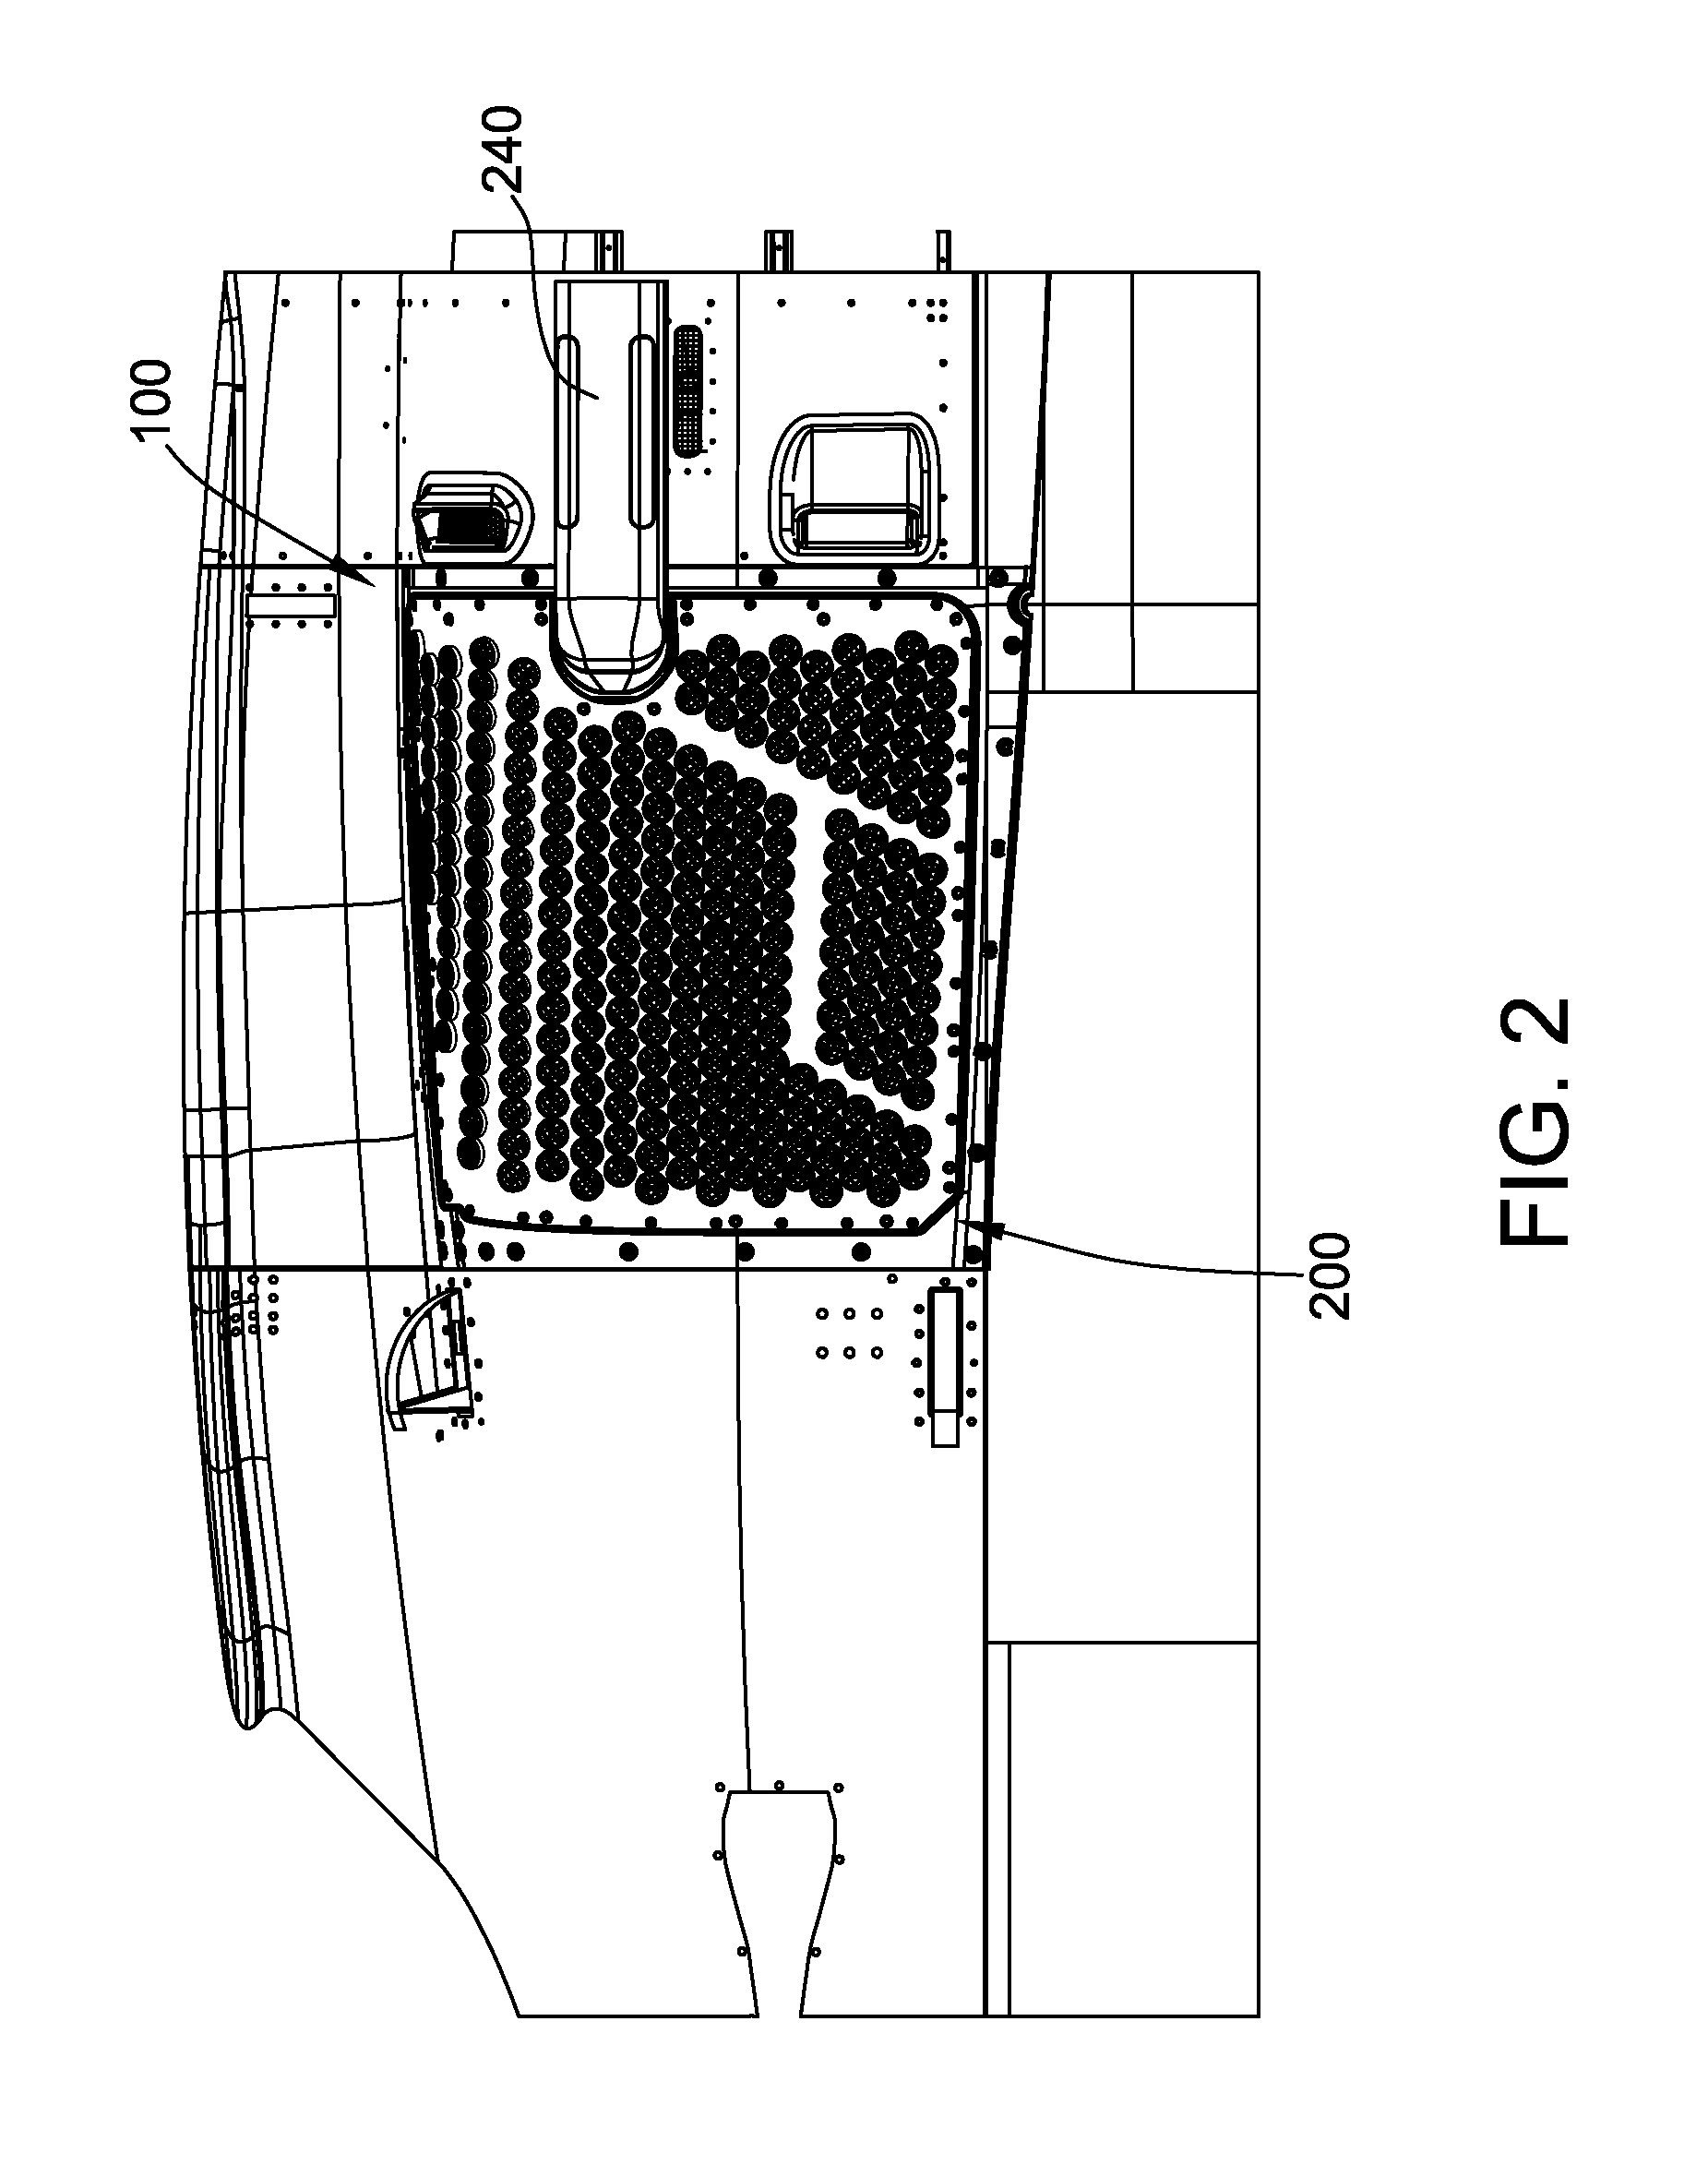 Interchangeable inlet protection systems for air intakes of aircraft engines and related method